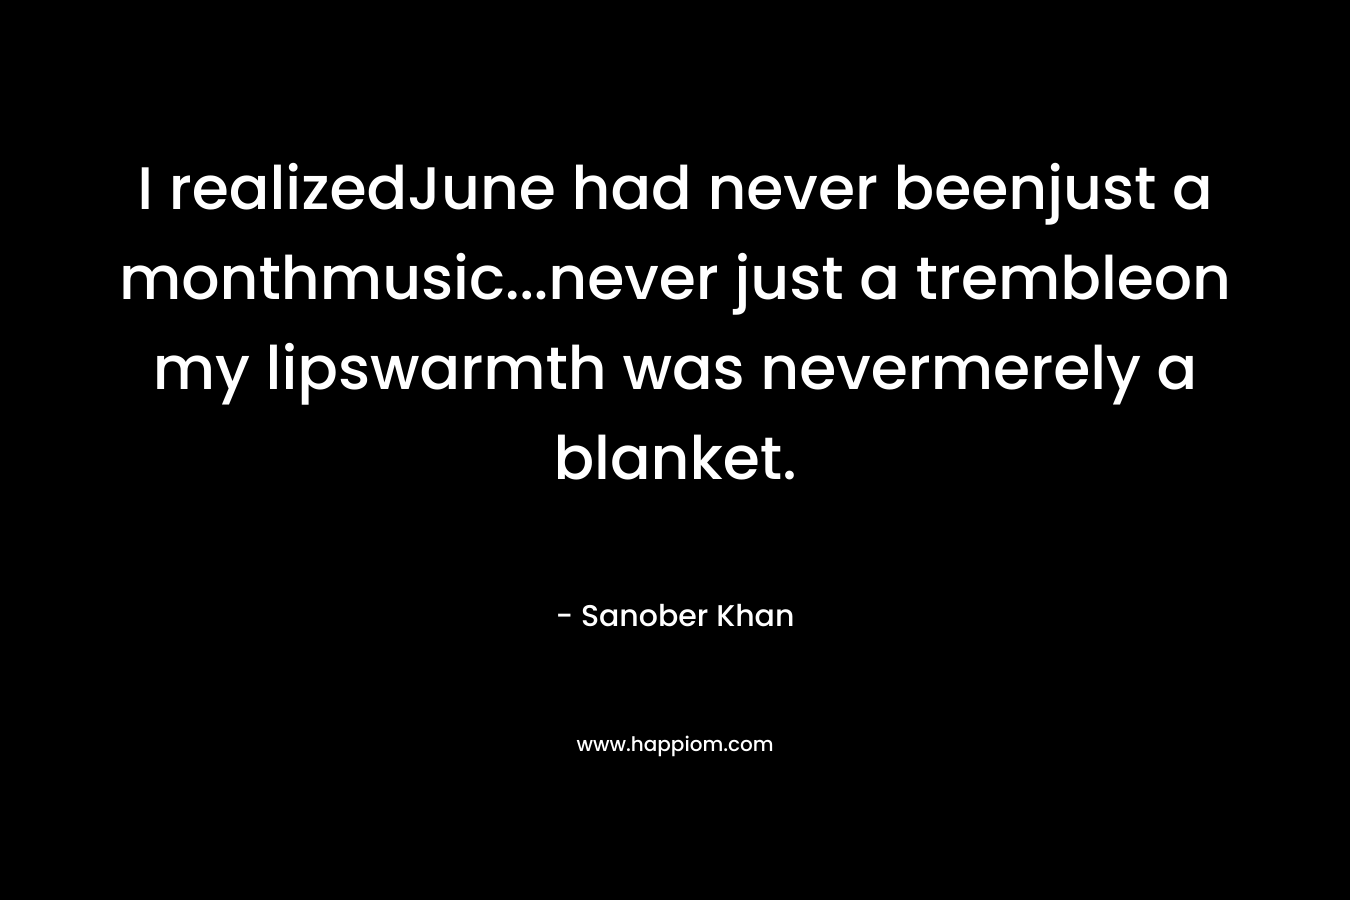 I realizedJune had never beenjust a monthmusic...never just a trembleon my lipswarmth was nevermerely a blanket.